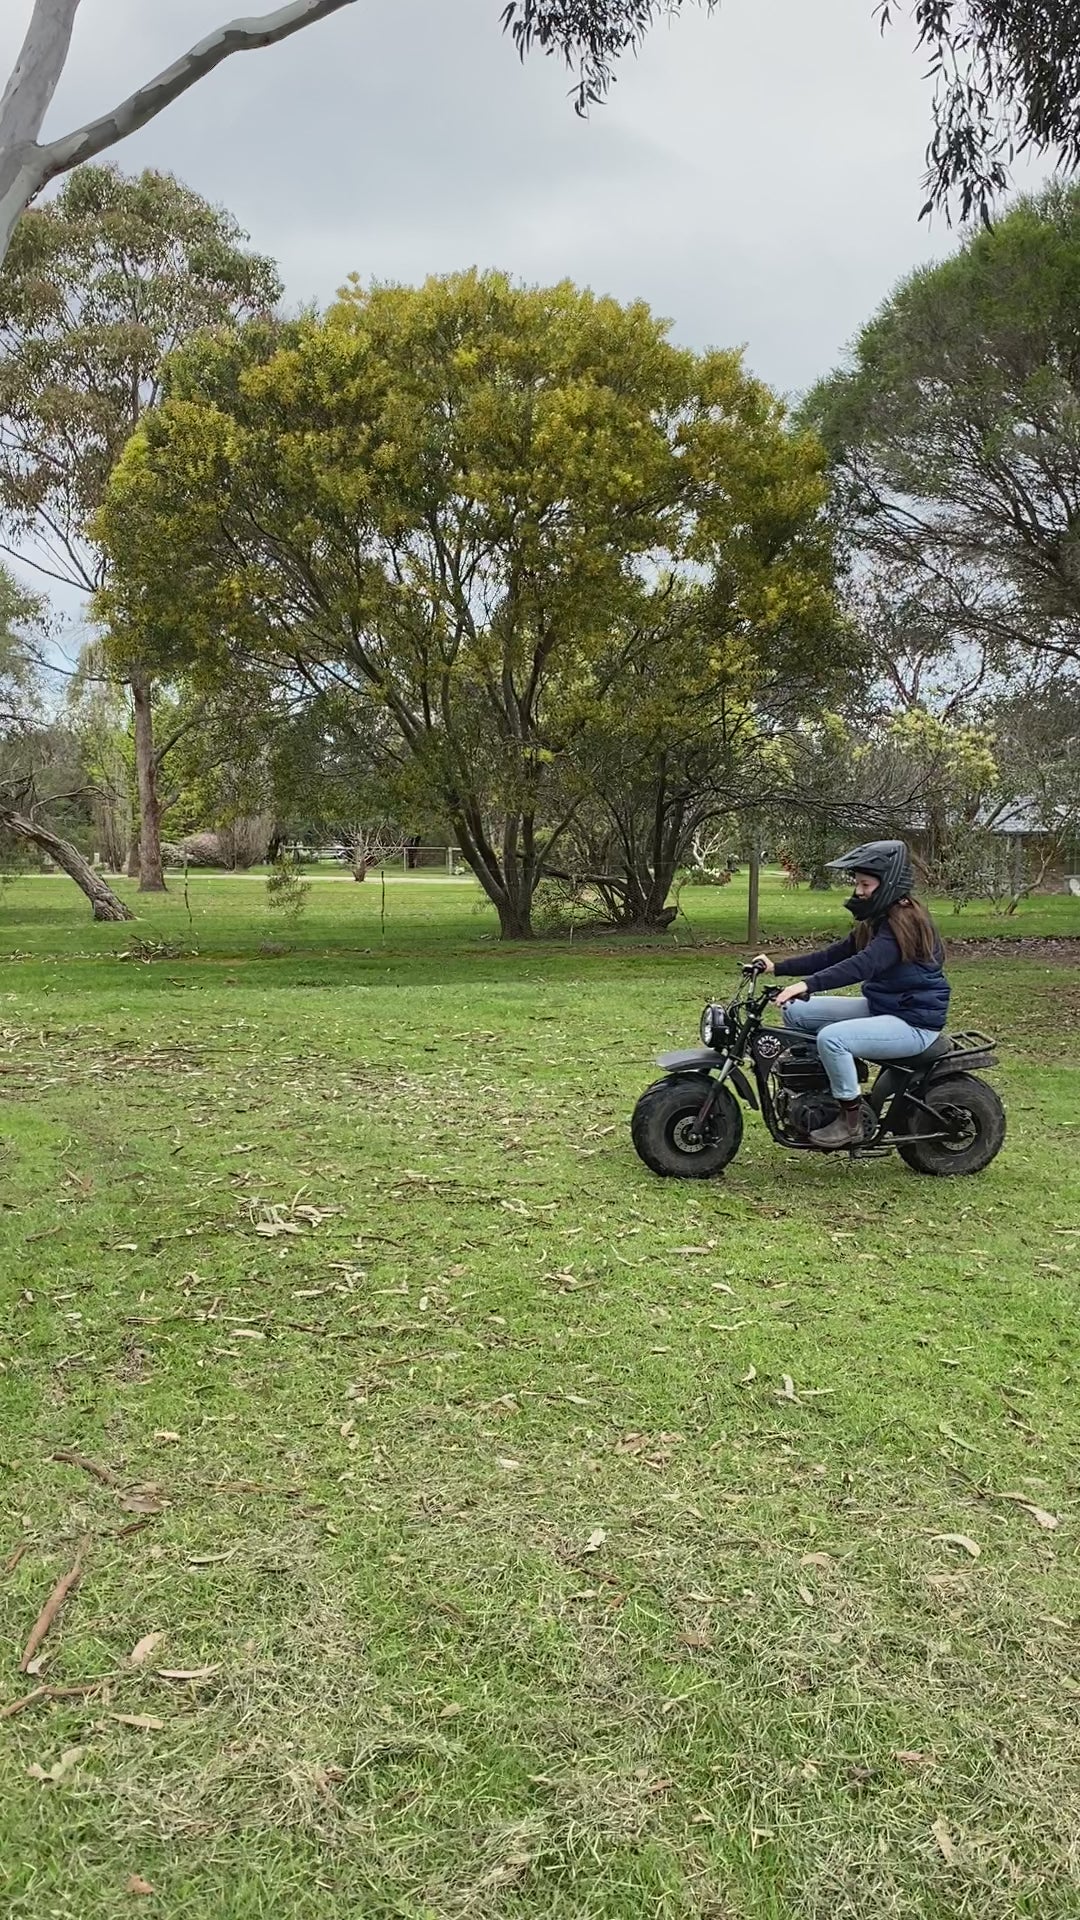 Load video: Did you know that our amazing FatCat Mini Motorbikes family includes none other than V8 Supercar and NASCAR royalty. That&#39;s right, the one and only Marcos Ambrose is not just a legend on the tracks, but also a proud FatCat customer and enthusiast!